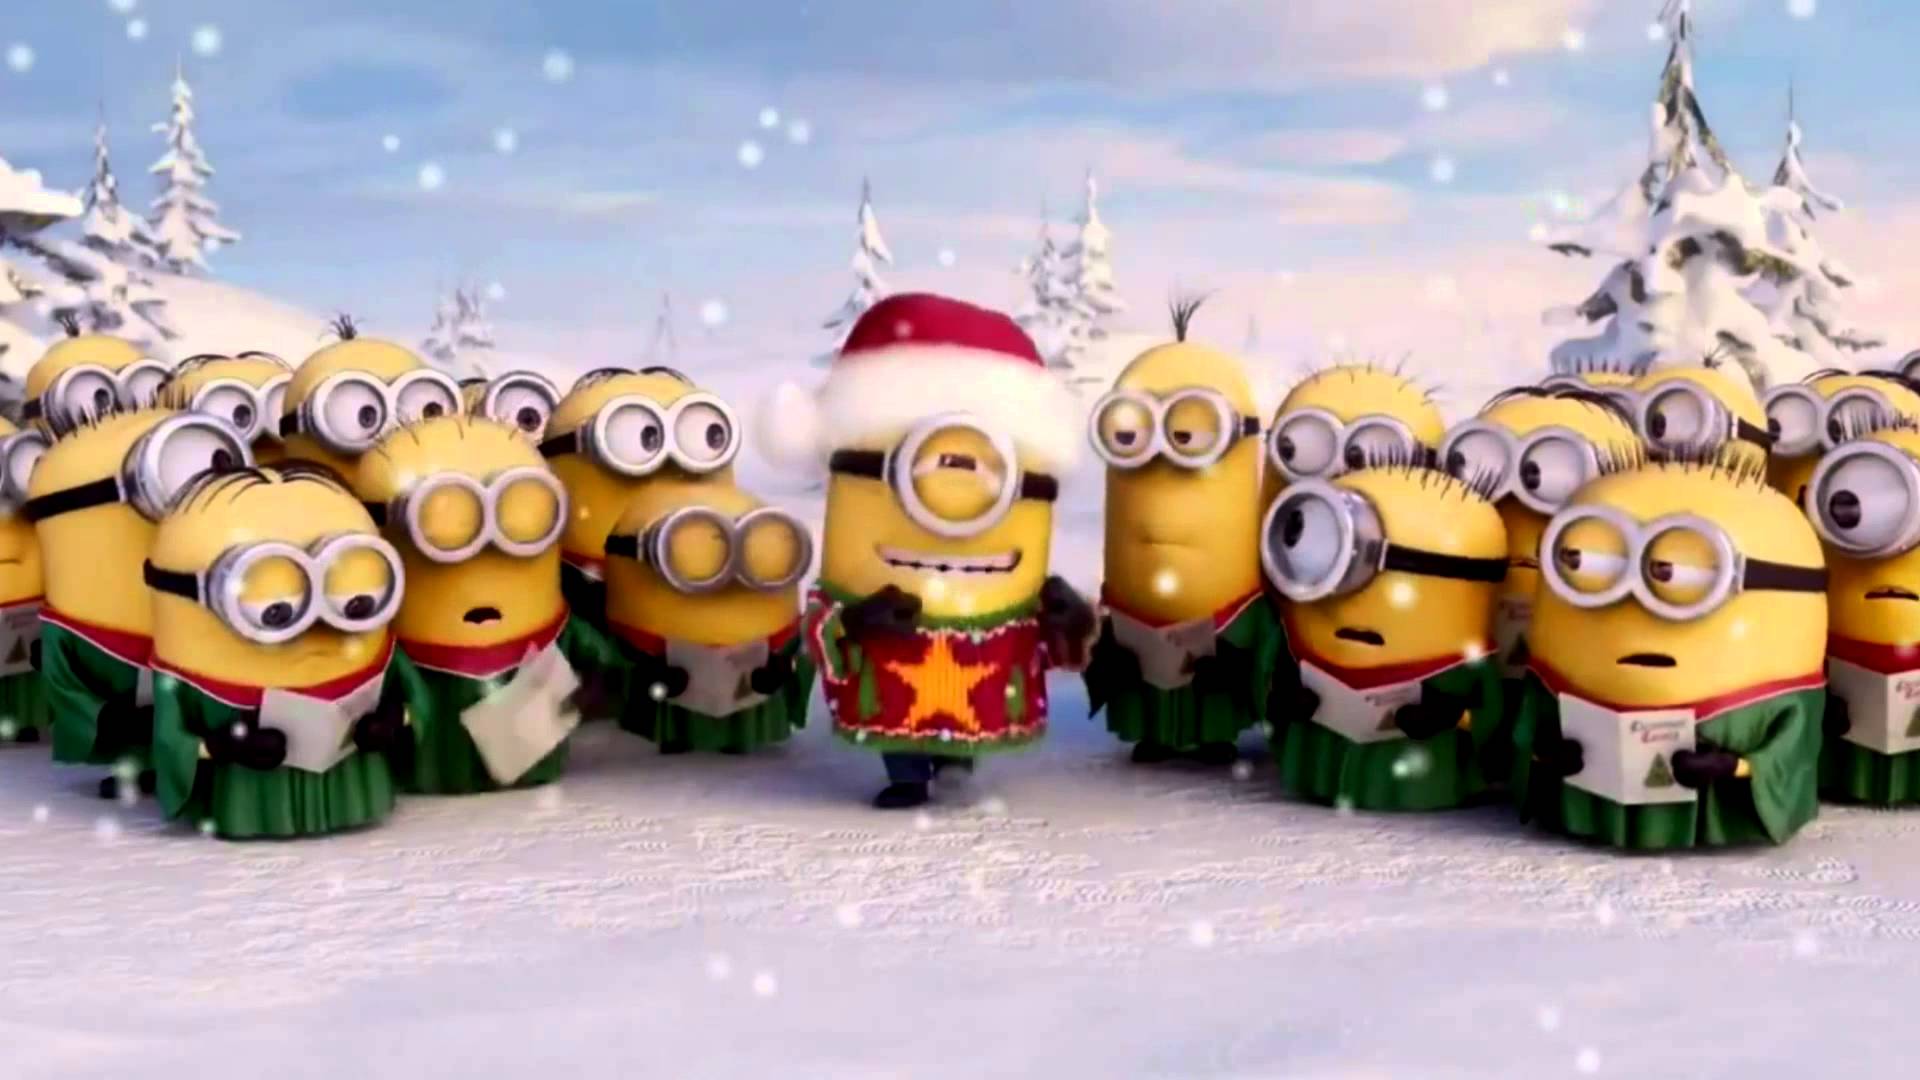 Christmas with minions in Suriname - YouTube